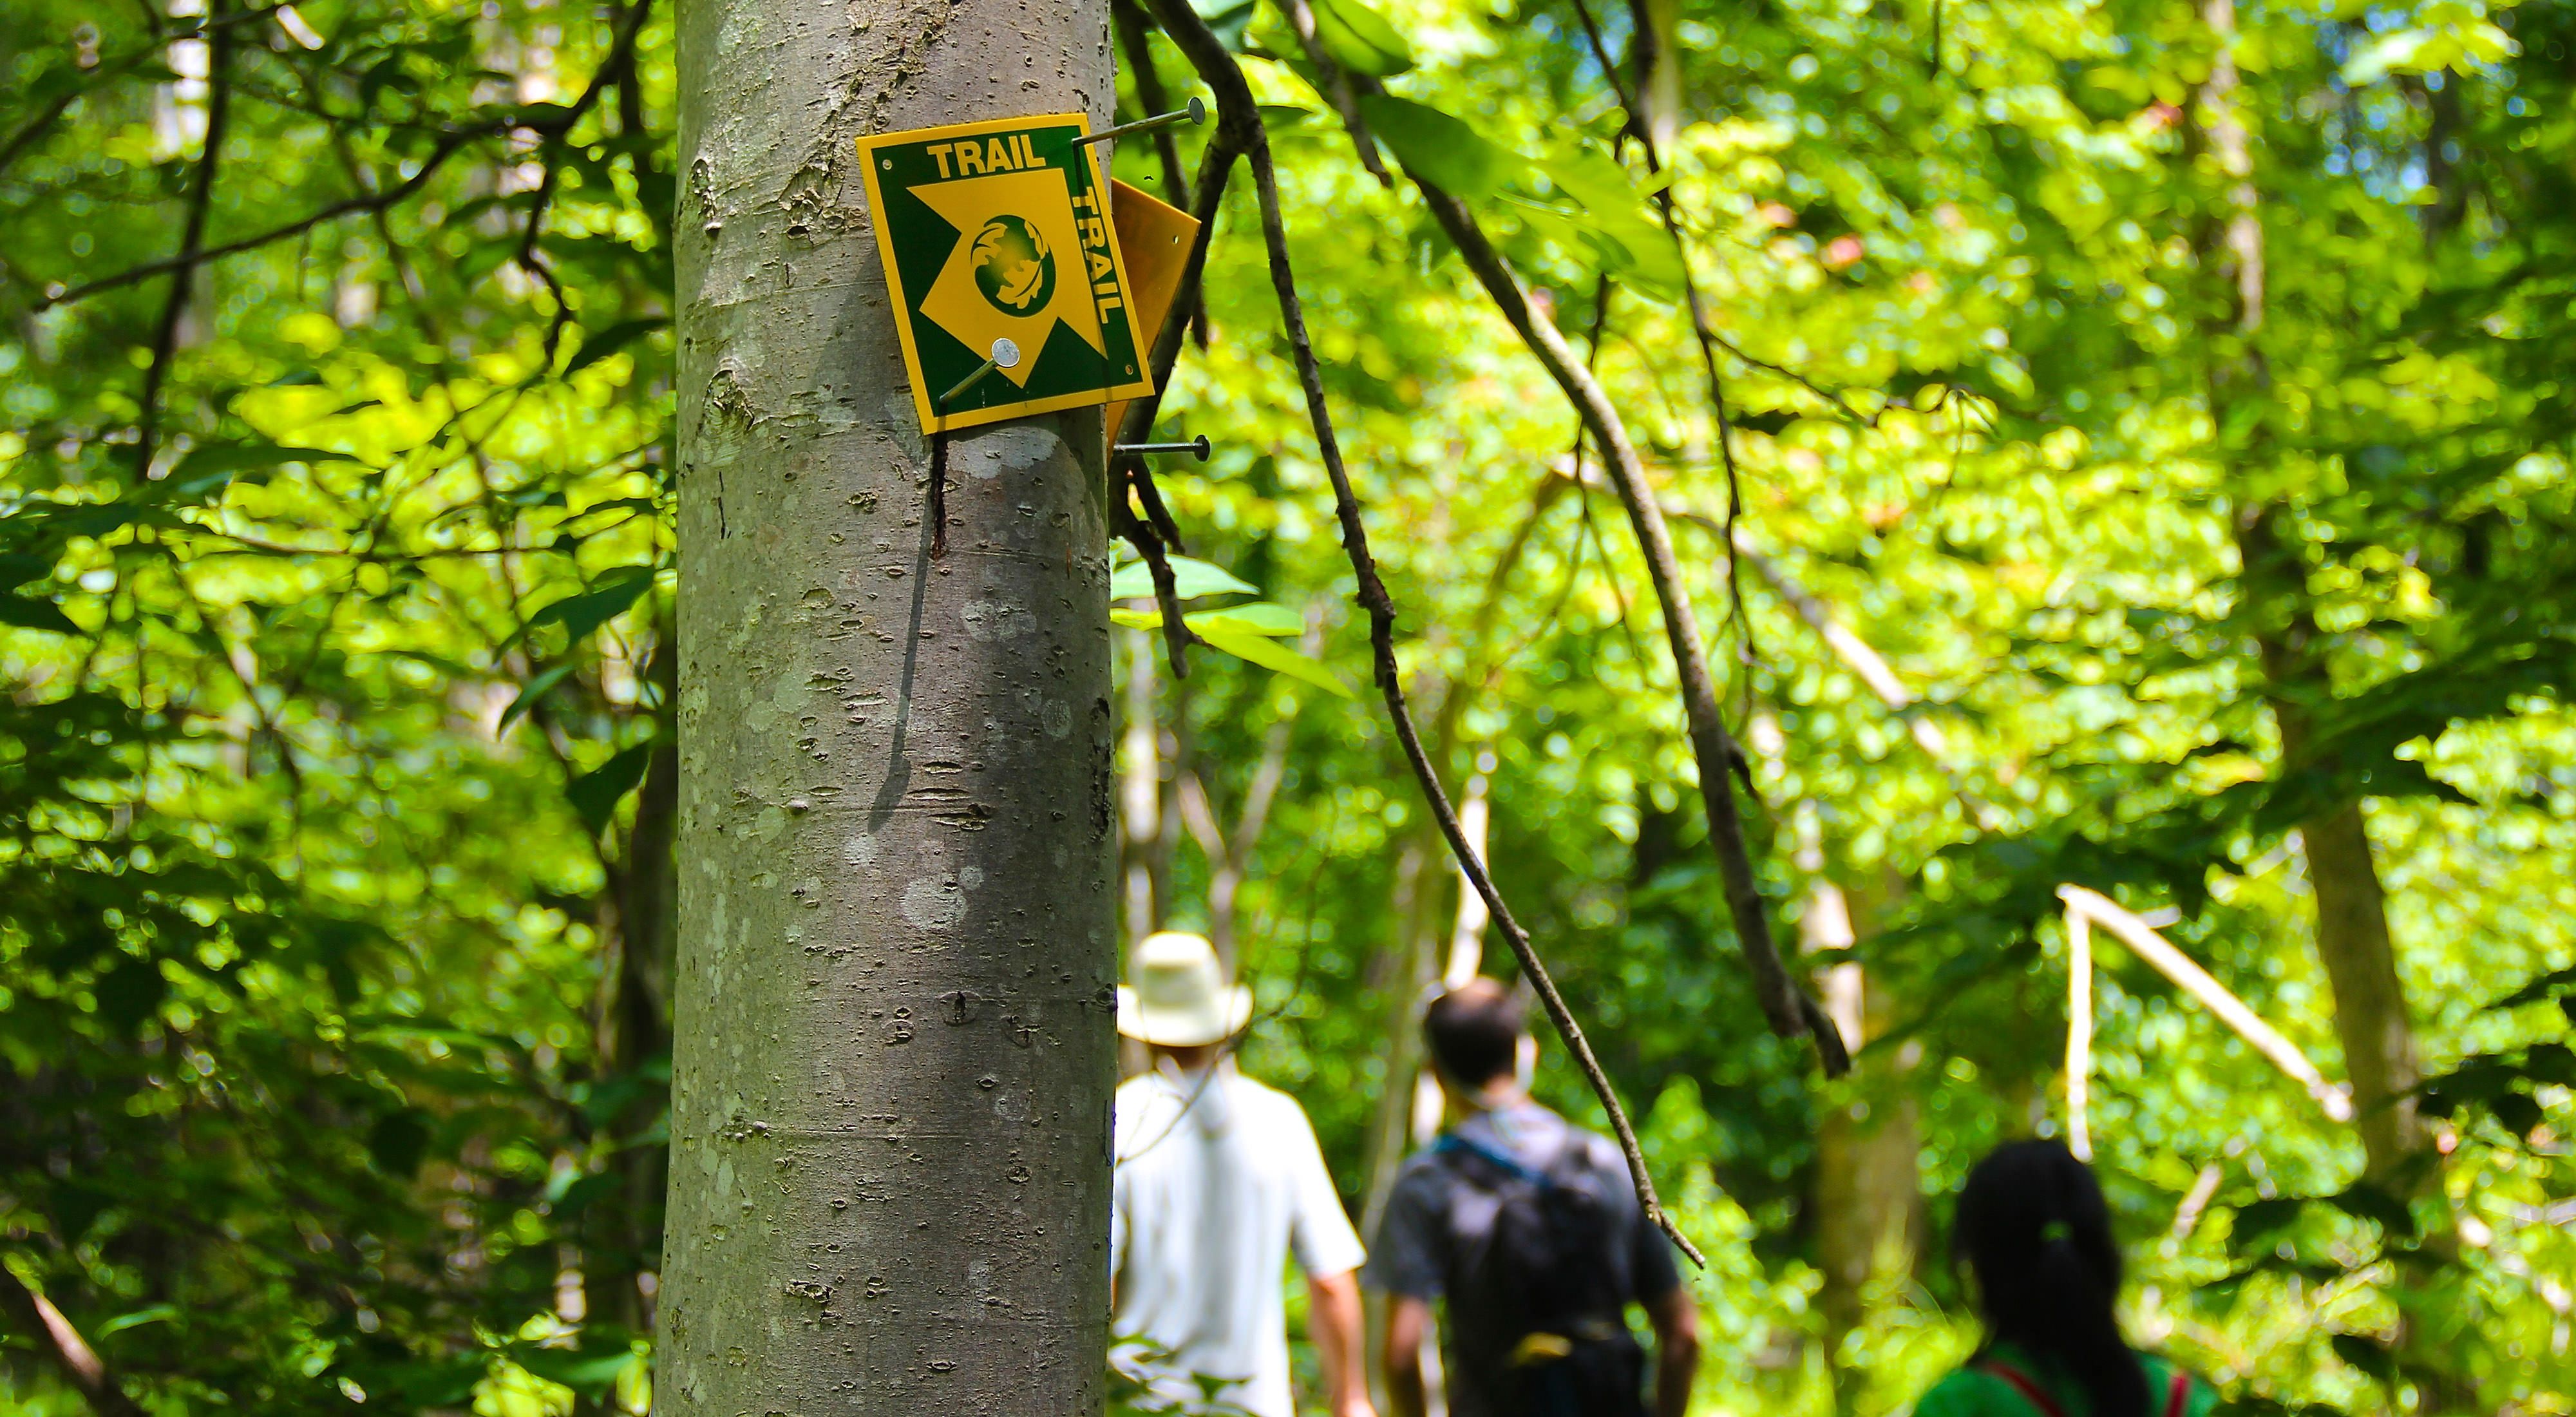 Three people hike together through Fraser Preserve. In the foreground a yellow and green TNC trail blaze is nailed to the truck of a narrow tree, marking the way forward.